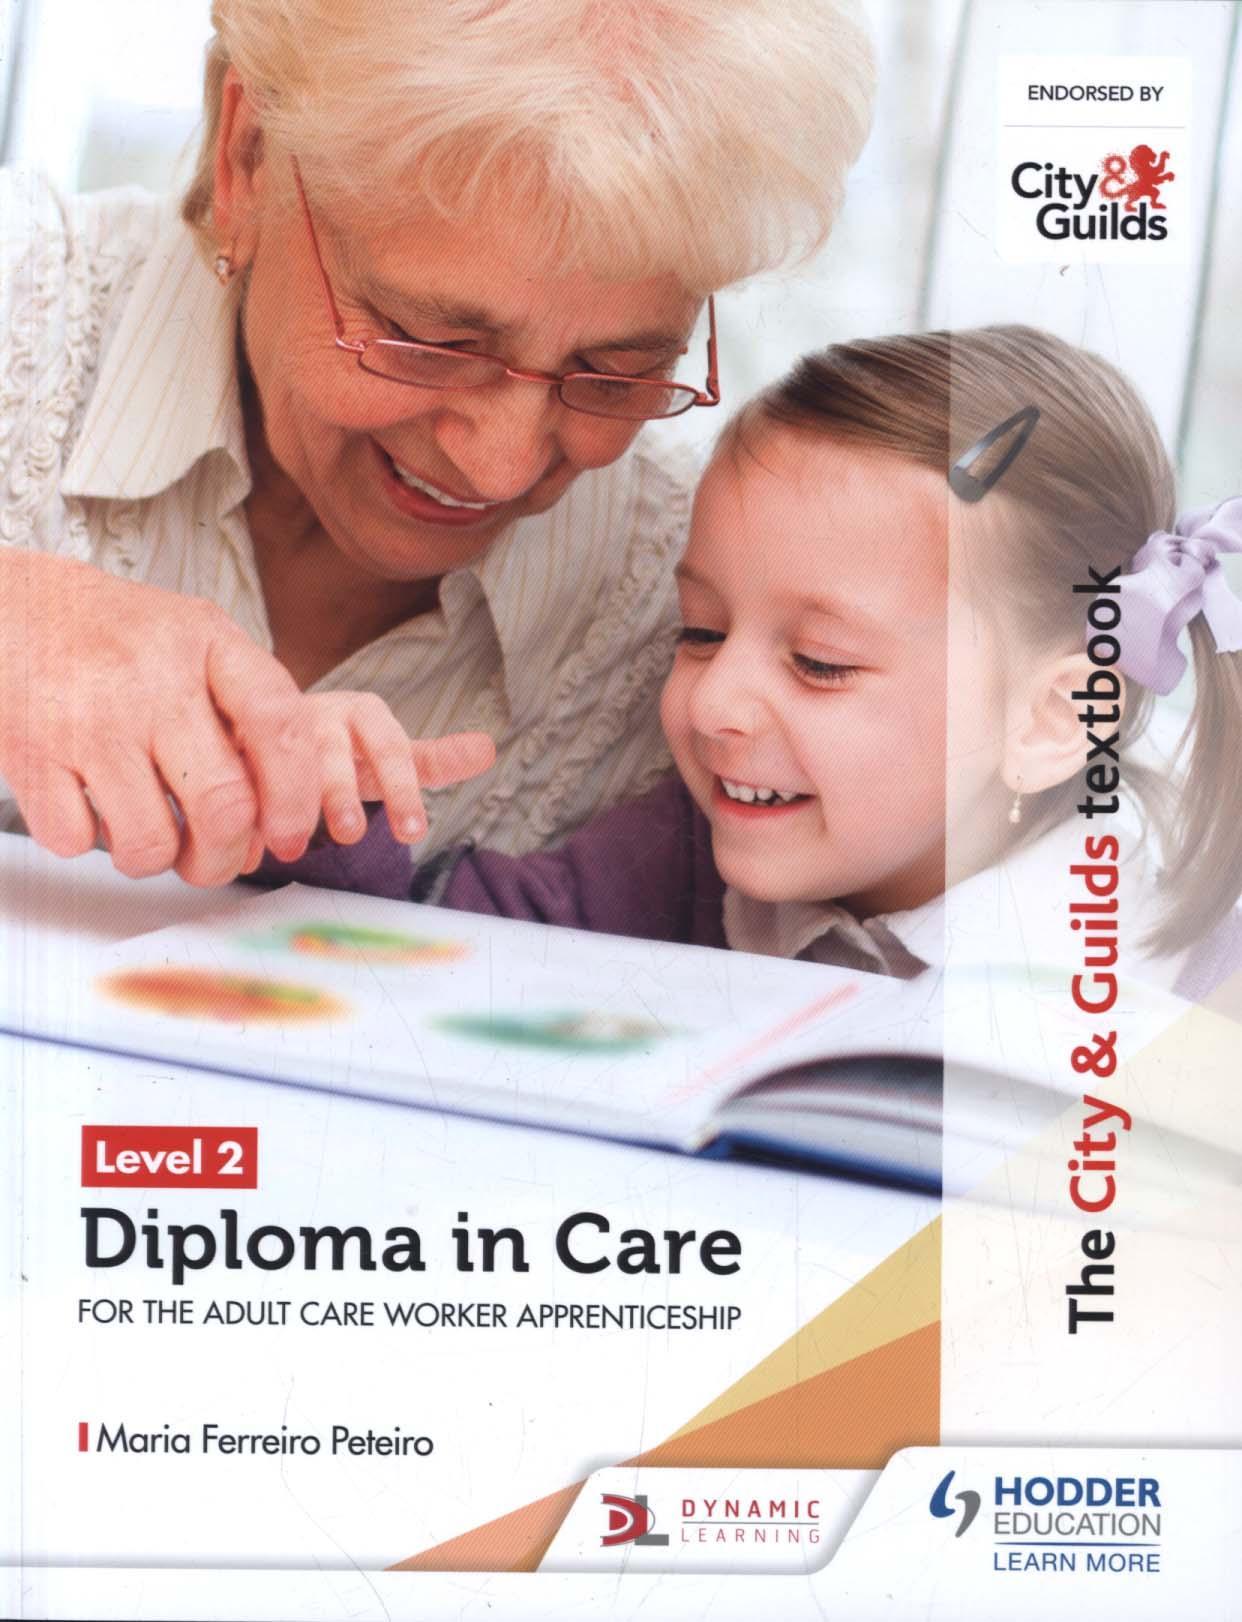 City & Guilds Textbook Level 2 Diploma in Care for the Adult